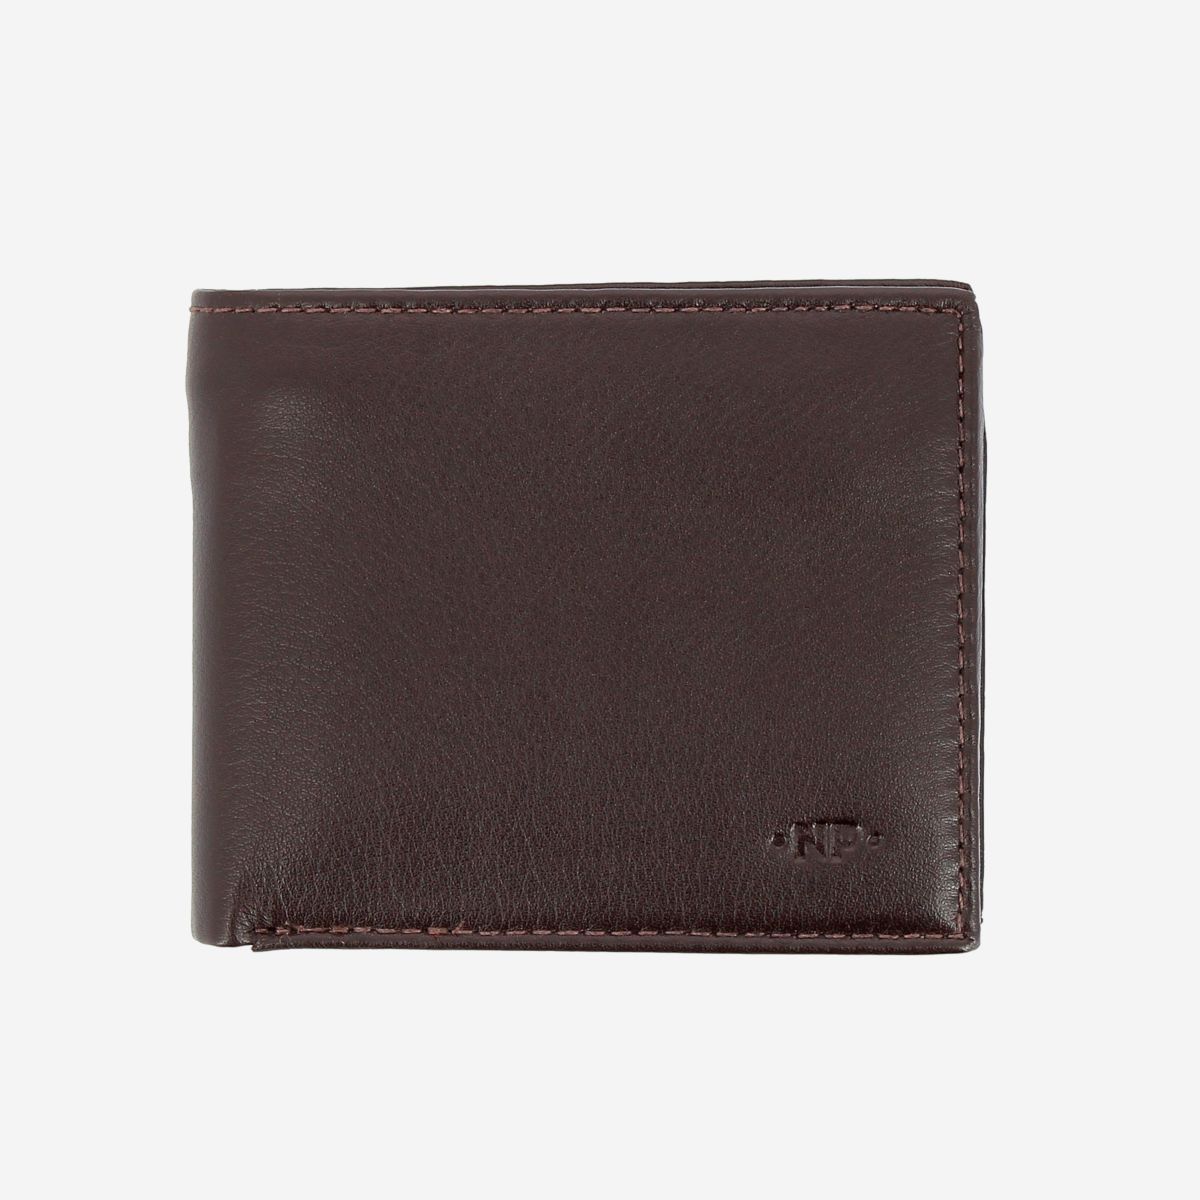 Nuvola Pelle Leather Coin Purse Dark Brown